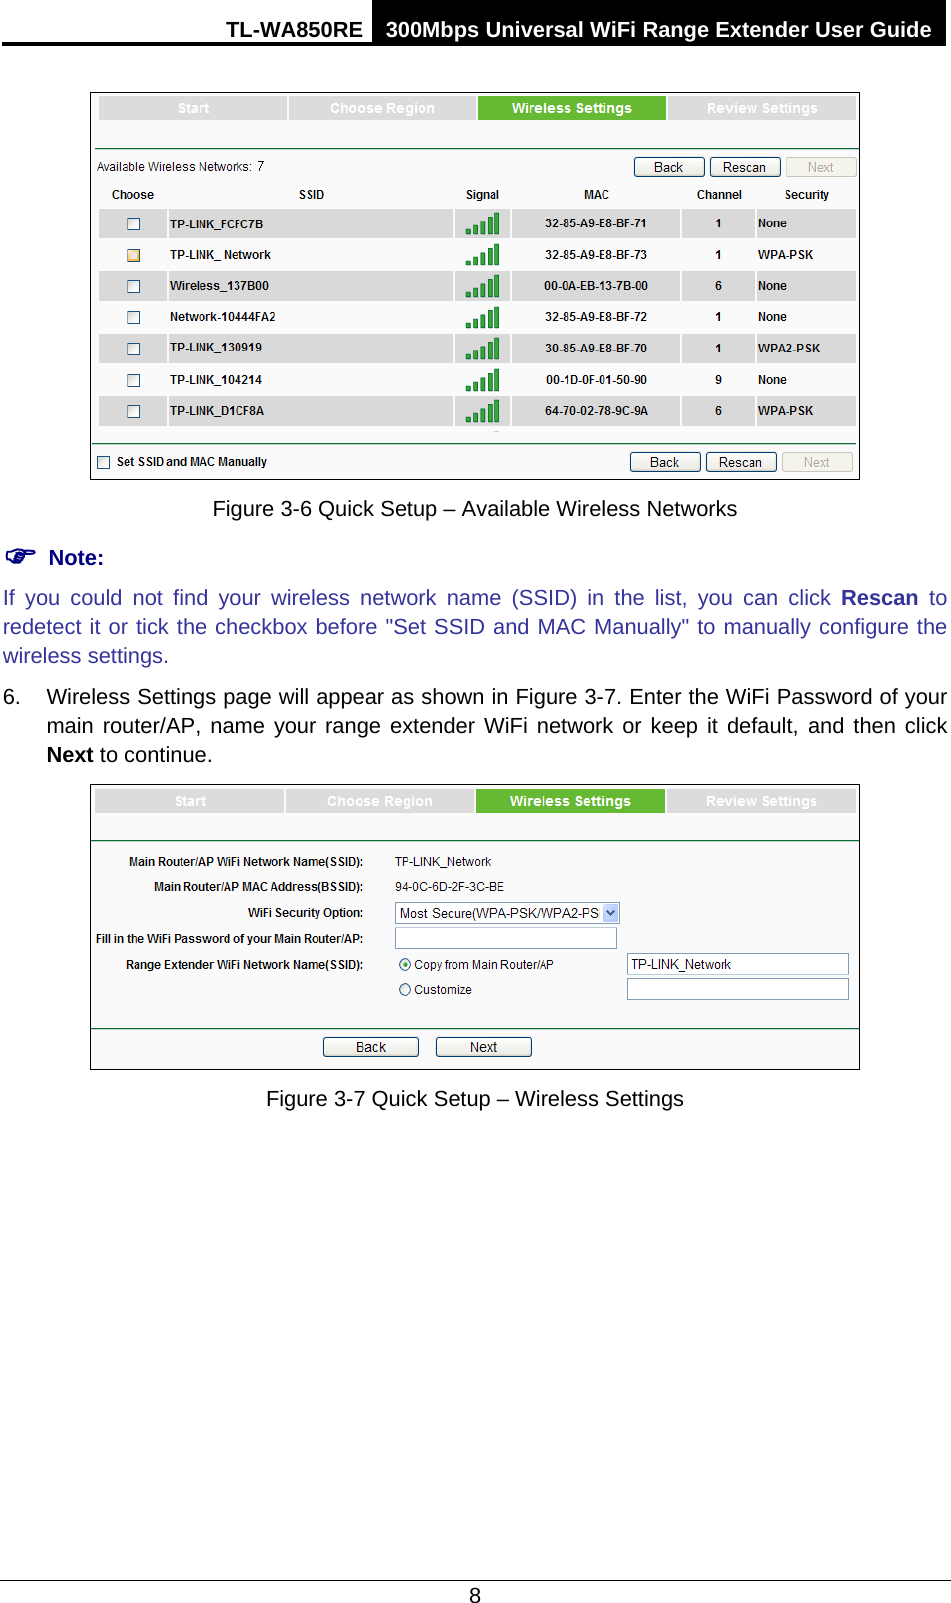 TL-WA850RE 300Mbps Universal WiFi Range Extender User Guide  8  Figure 3-6 Quick Setup – Available Wireless Networks  Note: If you could not find your wireless network name (SSID) in the list, you can click Rescan to redetect it or tick the checkbox before &quot;Set SSID and MAC Manually&quot; to manually configure the wireless settings. 6. Wireless Settings page will appear as shown in Figure 3-7. Enter the WiFi Password of your main router/AP, name your range extender WiFi network or keep it default,  and then click Next to continue.  Figure 3-7 Quick Setup – Wireless Settings 